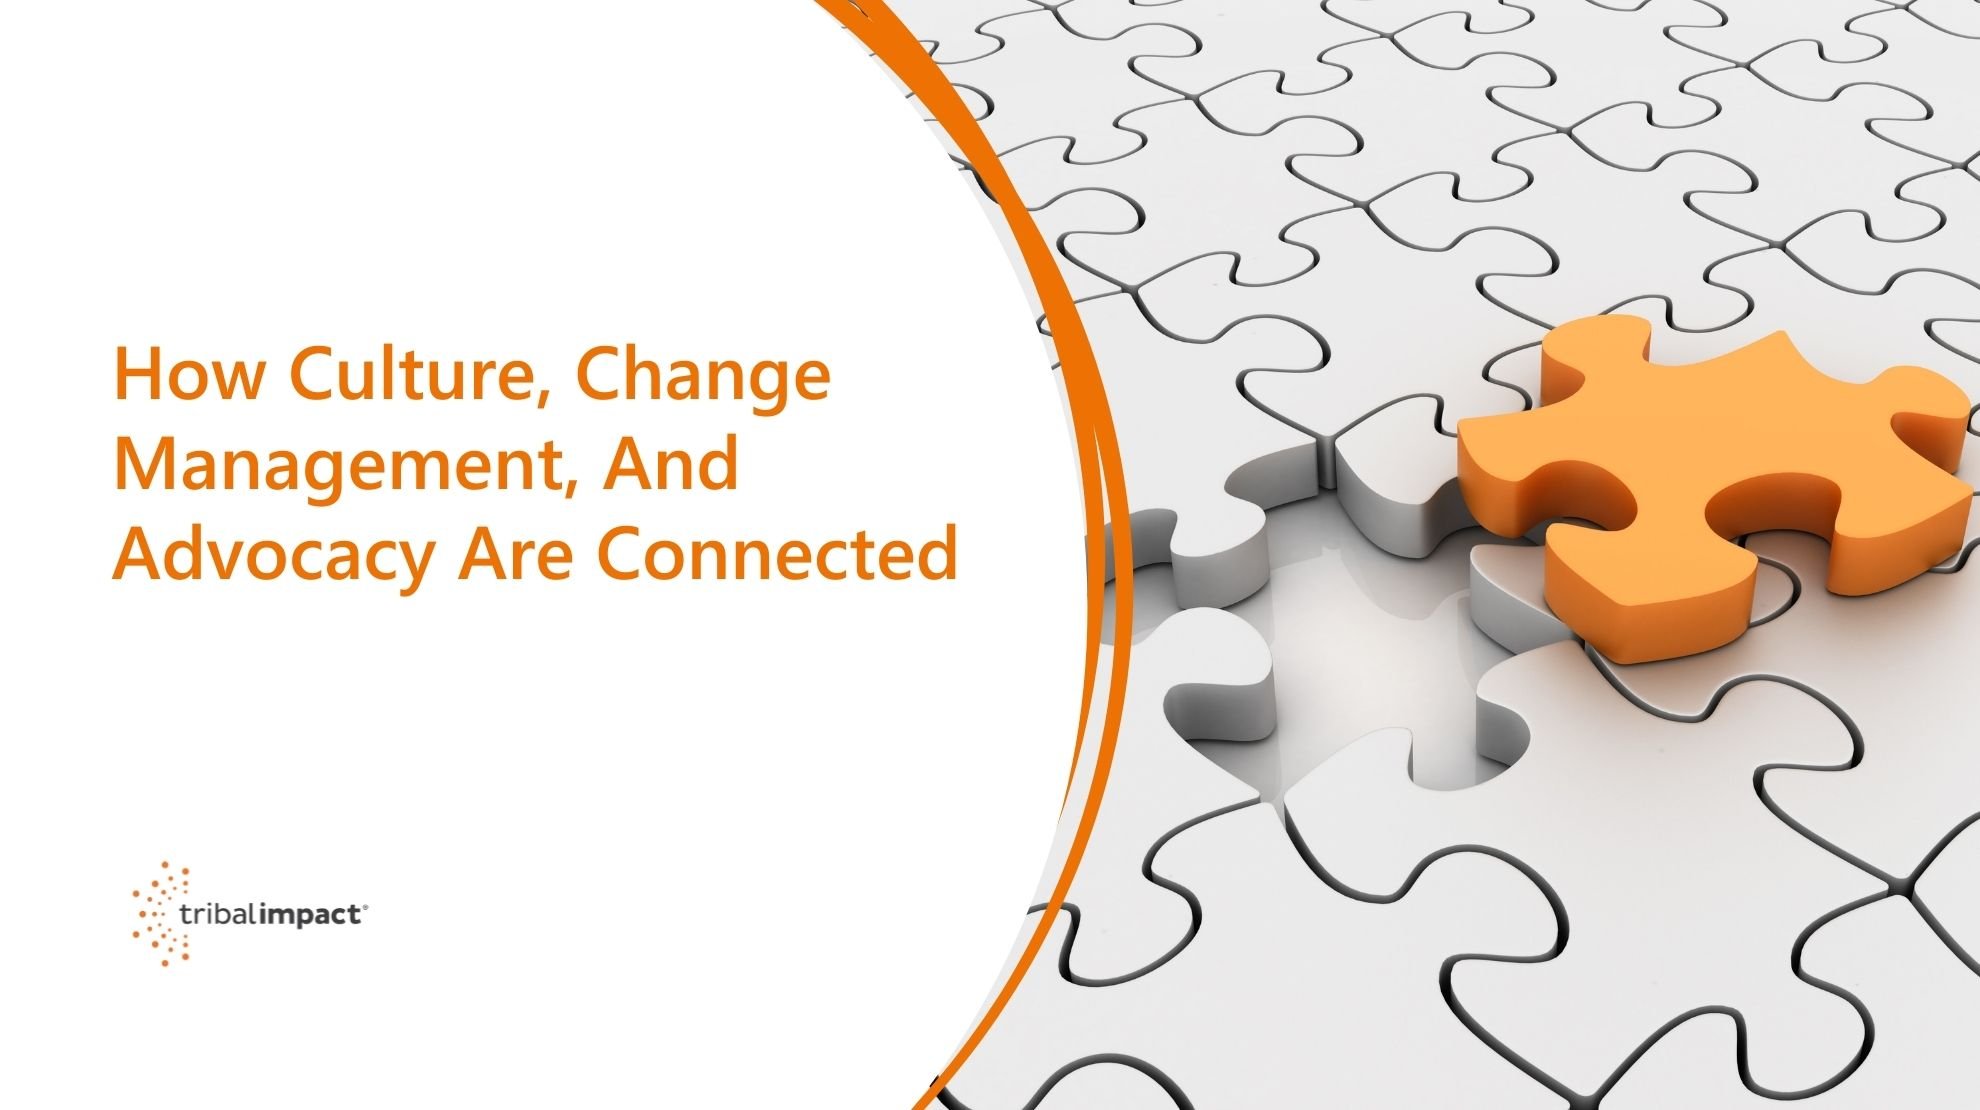 How Culture, Change Management, And Advocacy Are Connected